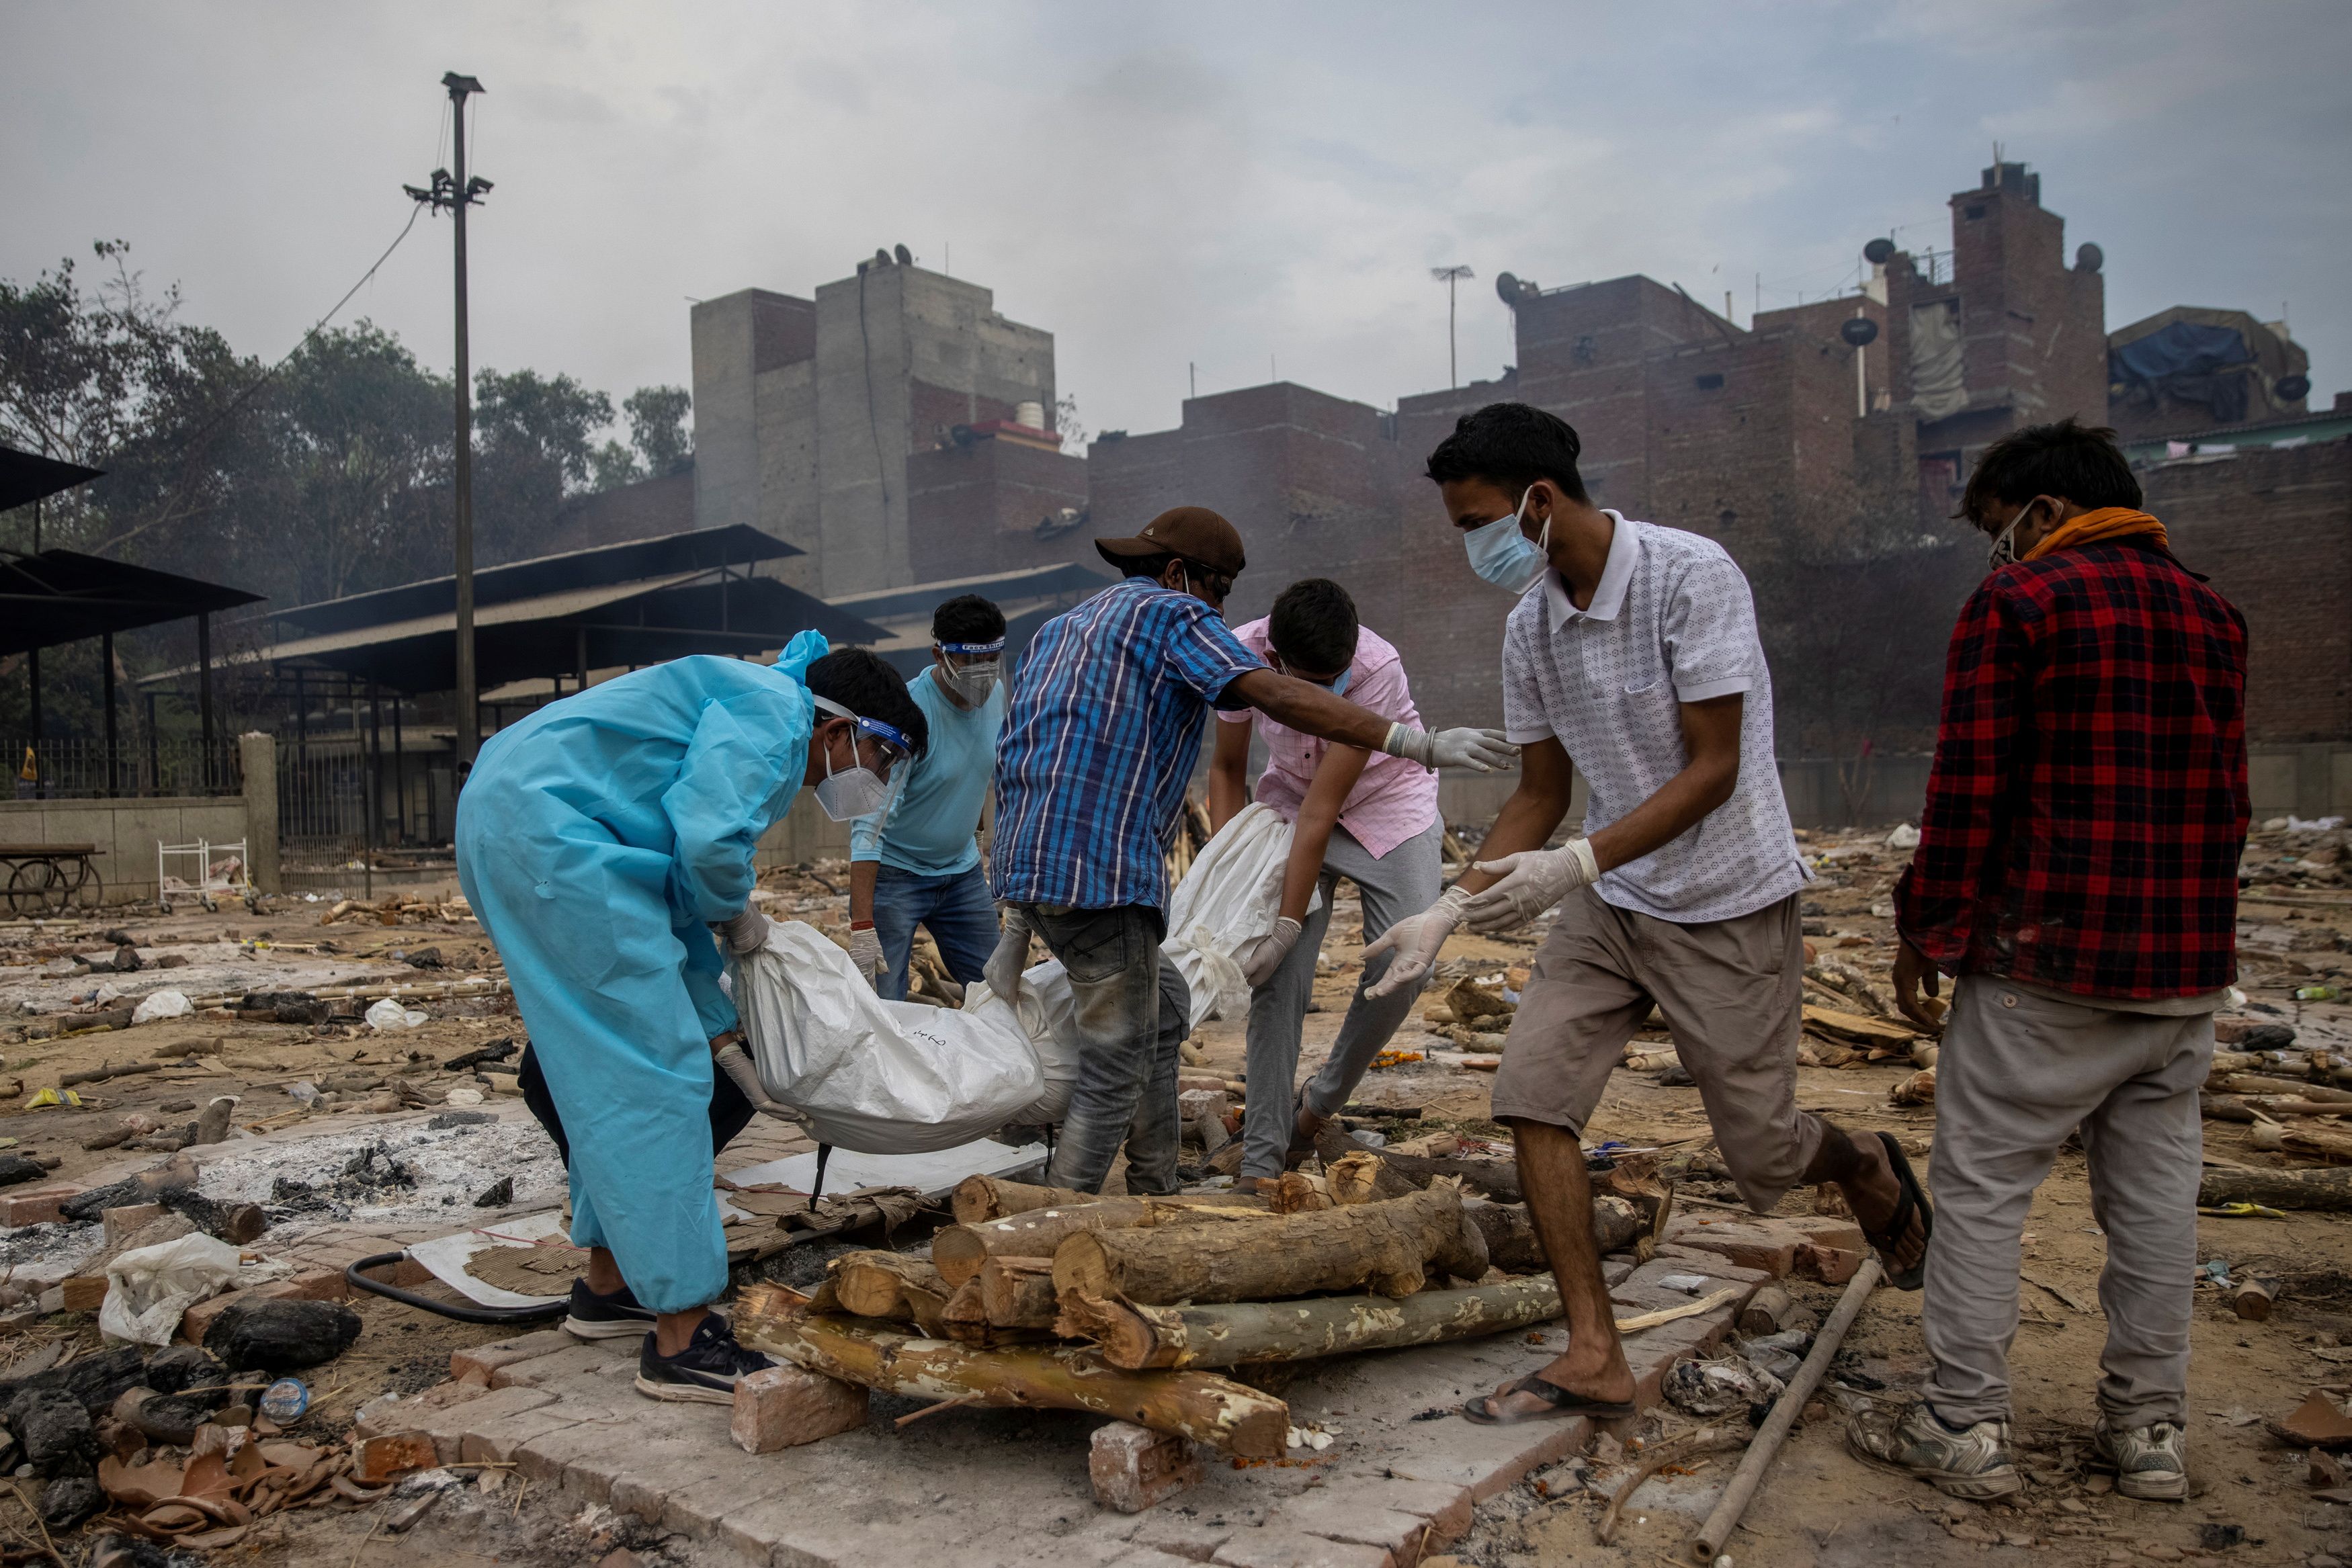 Pranav Mishra is helped by his relatives to place the body of his mother Mamta Mishra, who died from the coronavirus disease (COVID-19), on a pyre for her cremation at a crematorium ground in New Delhi